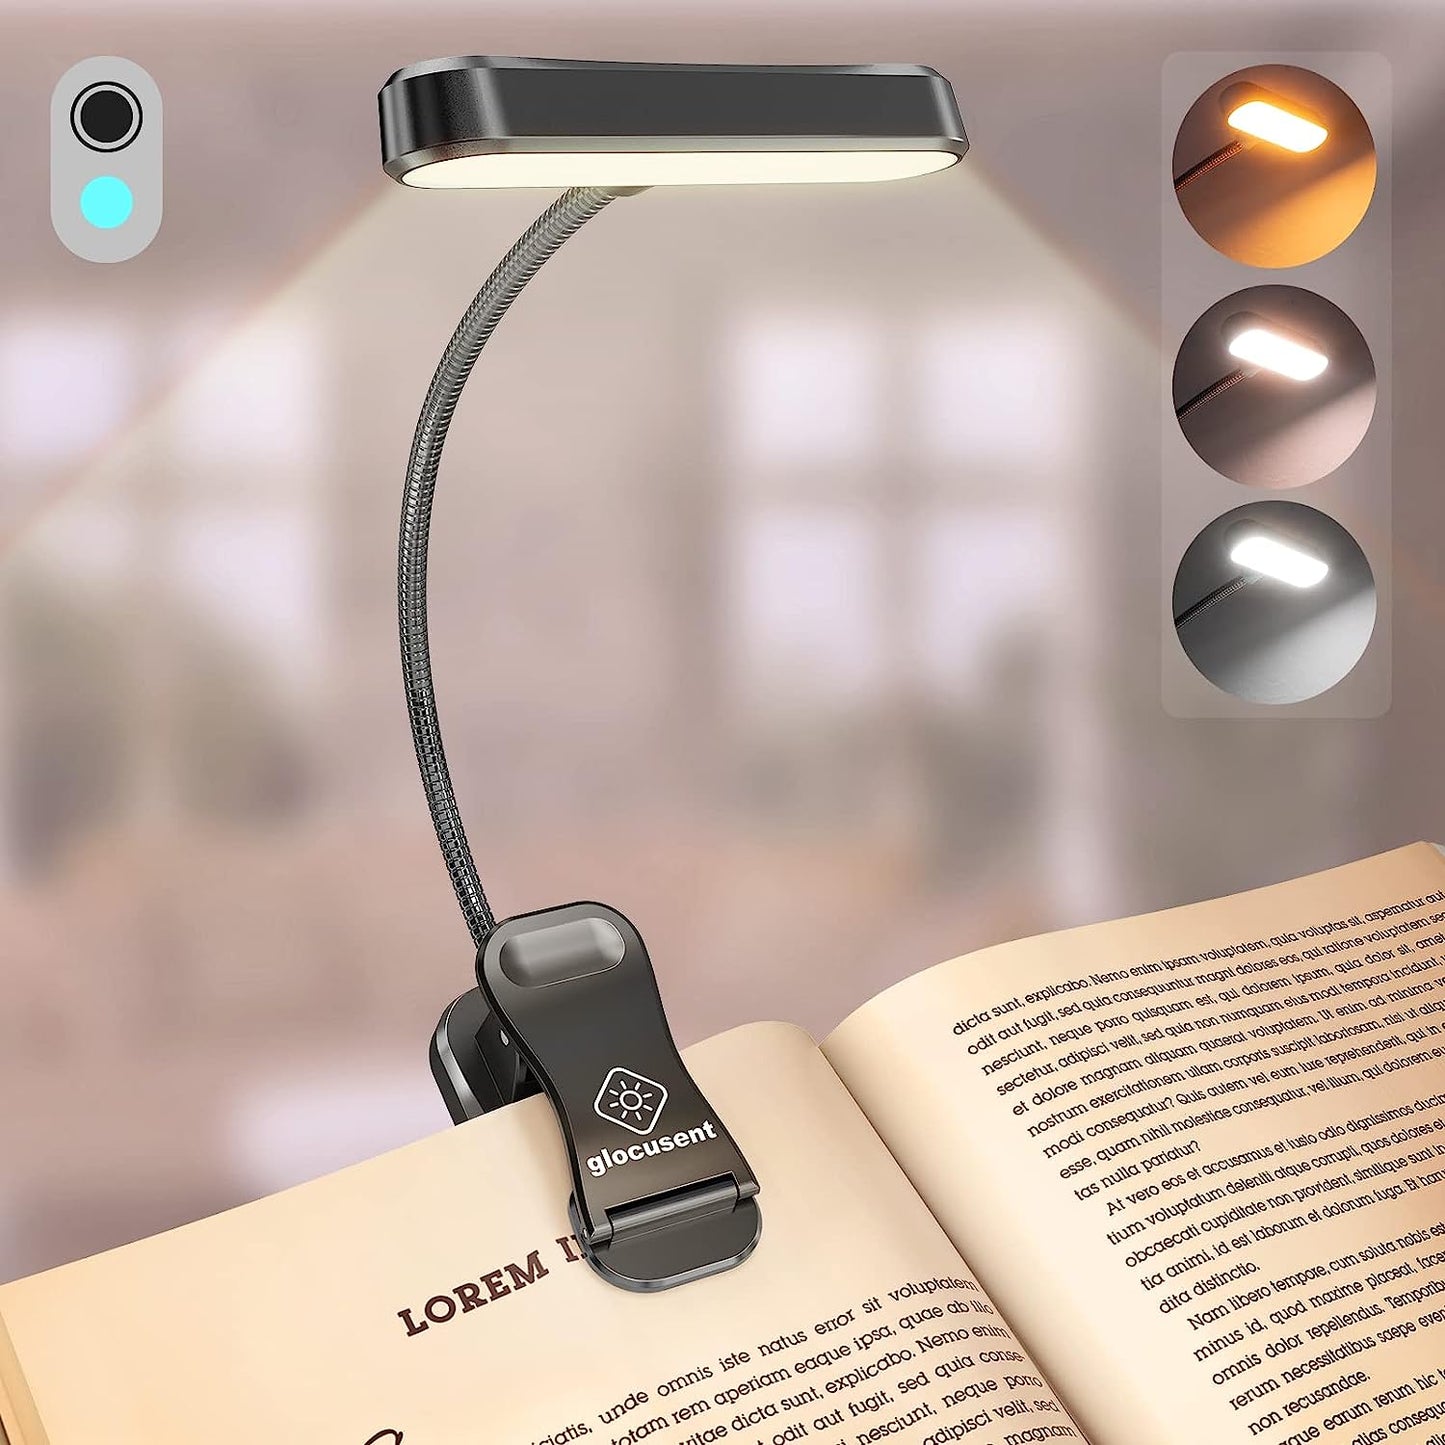 Warm and Cool Book Light for Supernote and Remarkable 2